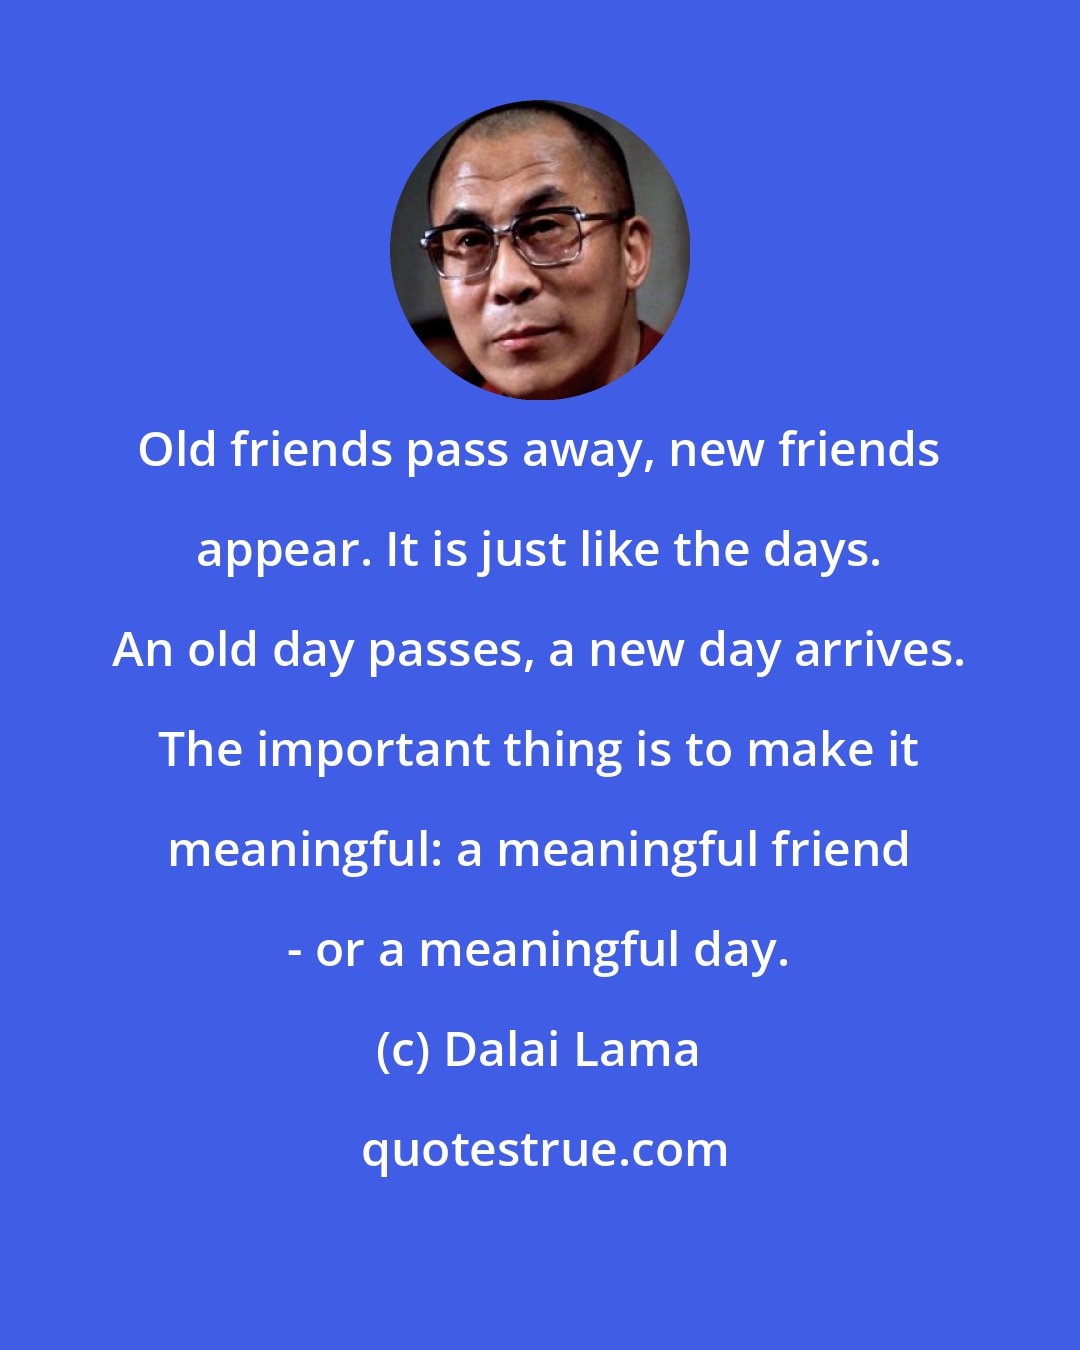 Dalai Lama: Old friends pass away, new friends appear. It is just like the days. An old day passes, a new day arrives. The important thing is to make it meaningful: a meaningful friend - or a meaningful day.